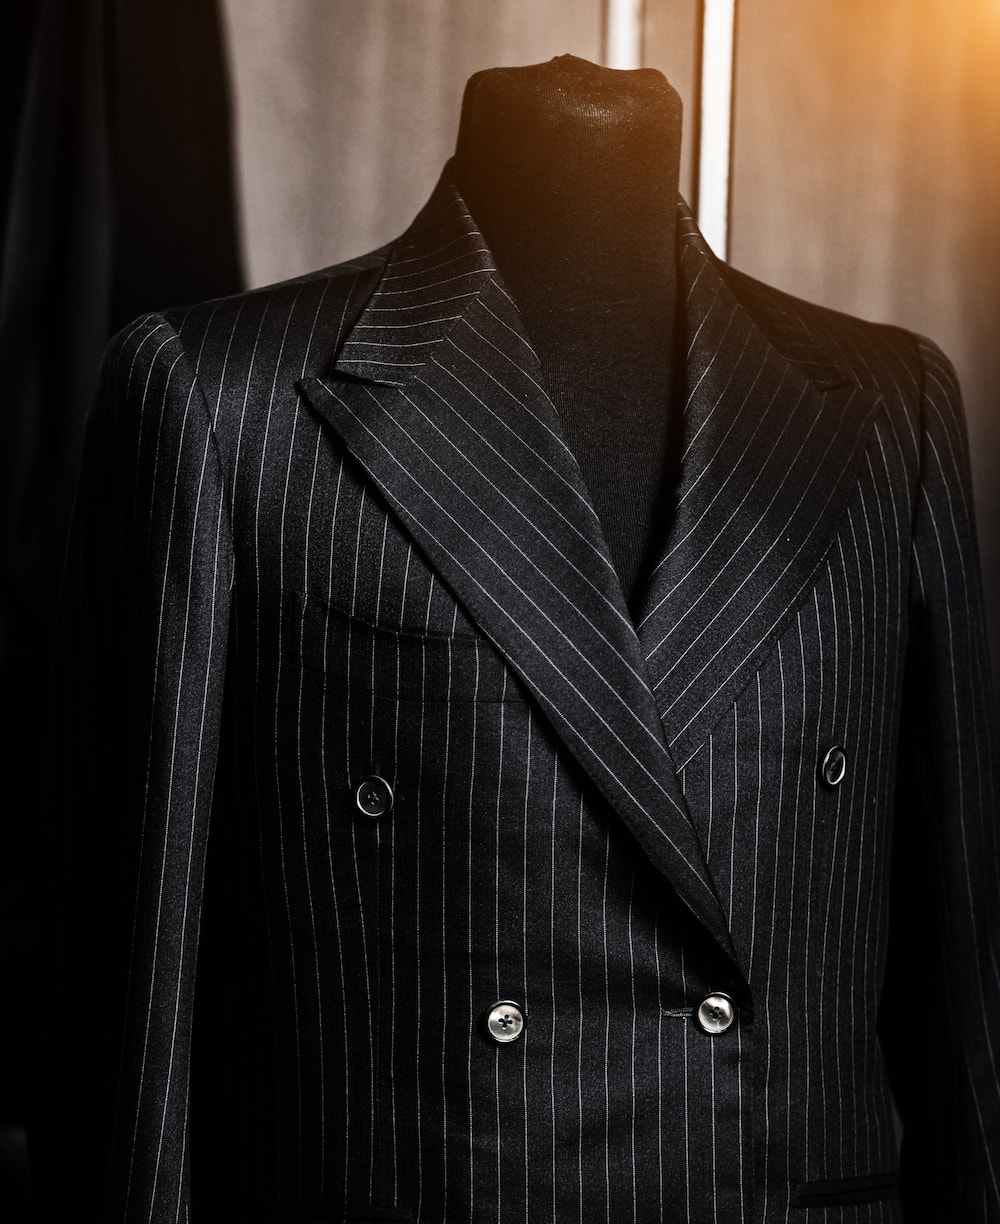 One of the most expensive ready-to-wear suits in the world